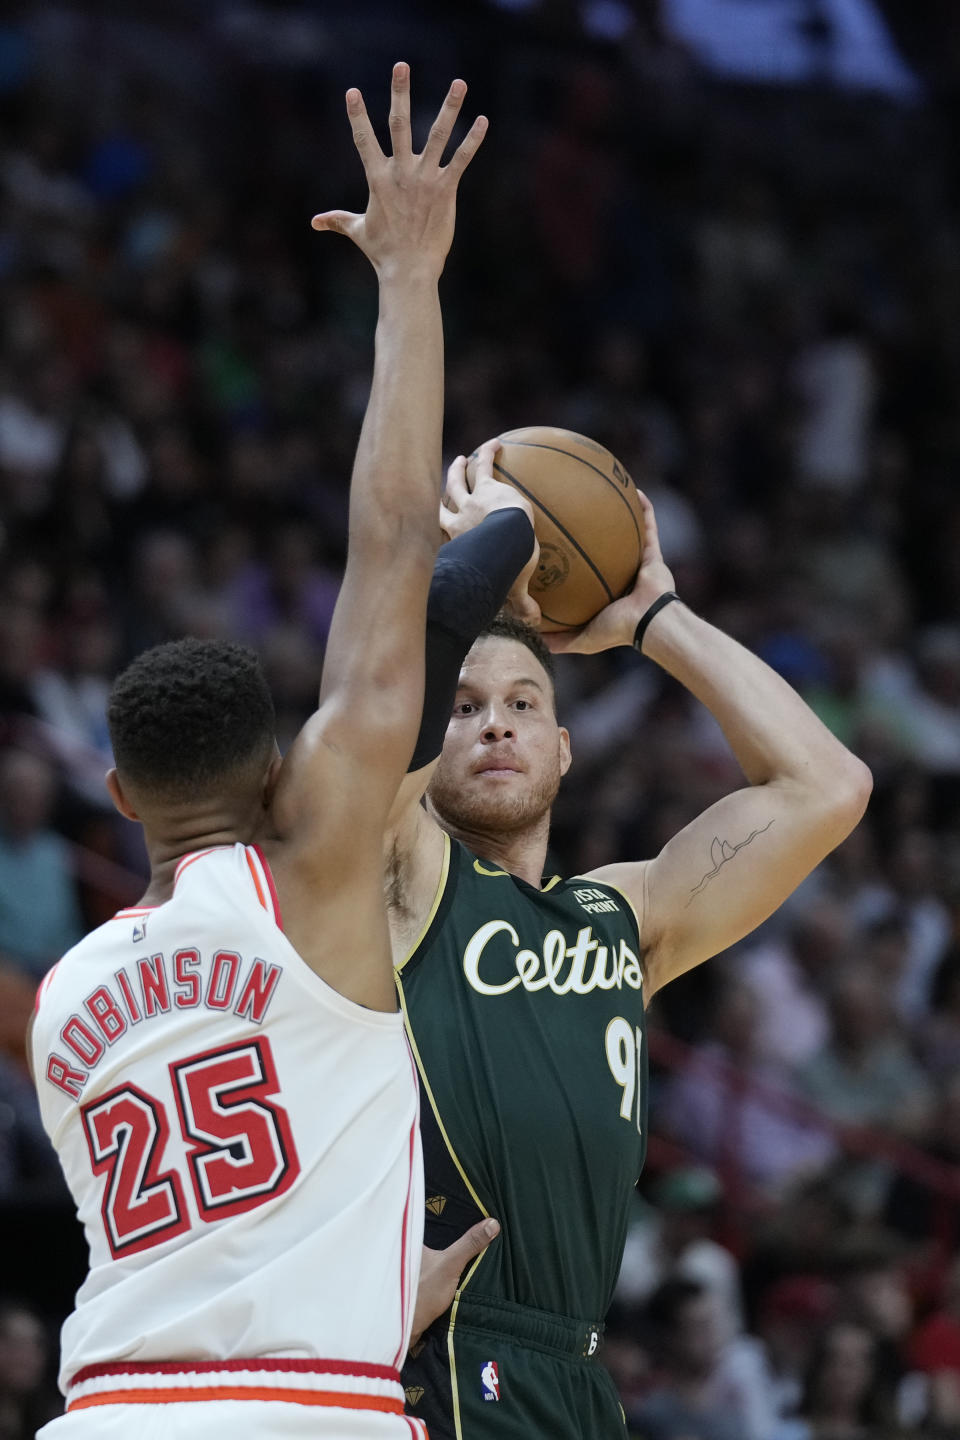 Boston Celtics forward Blake Griffin, rear, looks for an open teammate past Miami Heat center Orlando Robinson (25) during the first half of an NBA basketball game, Tuesday, Jan. 24, 2023, in Miami. (AP Photo/Wilfredo Lee)